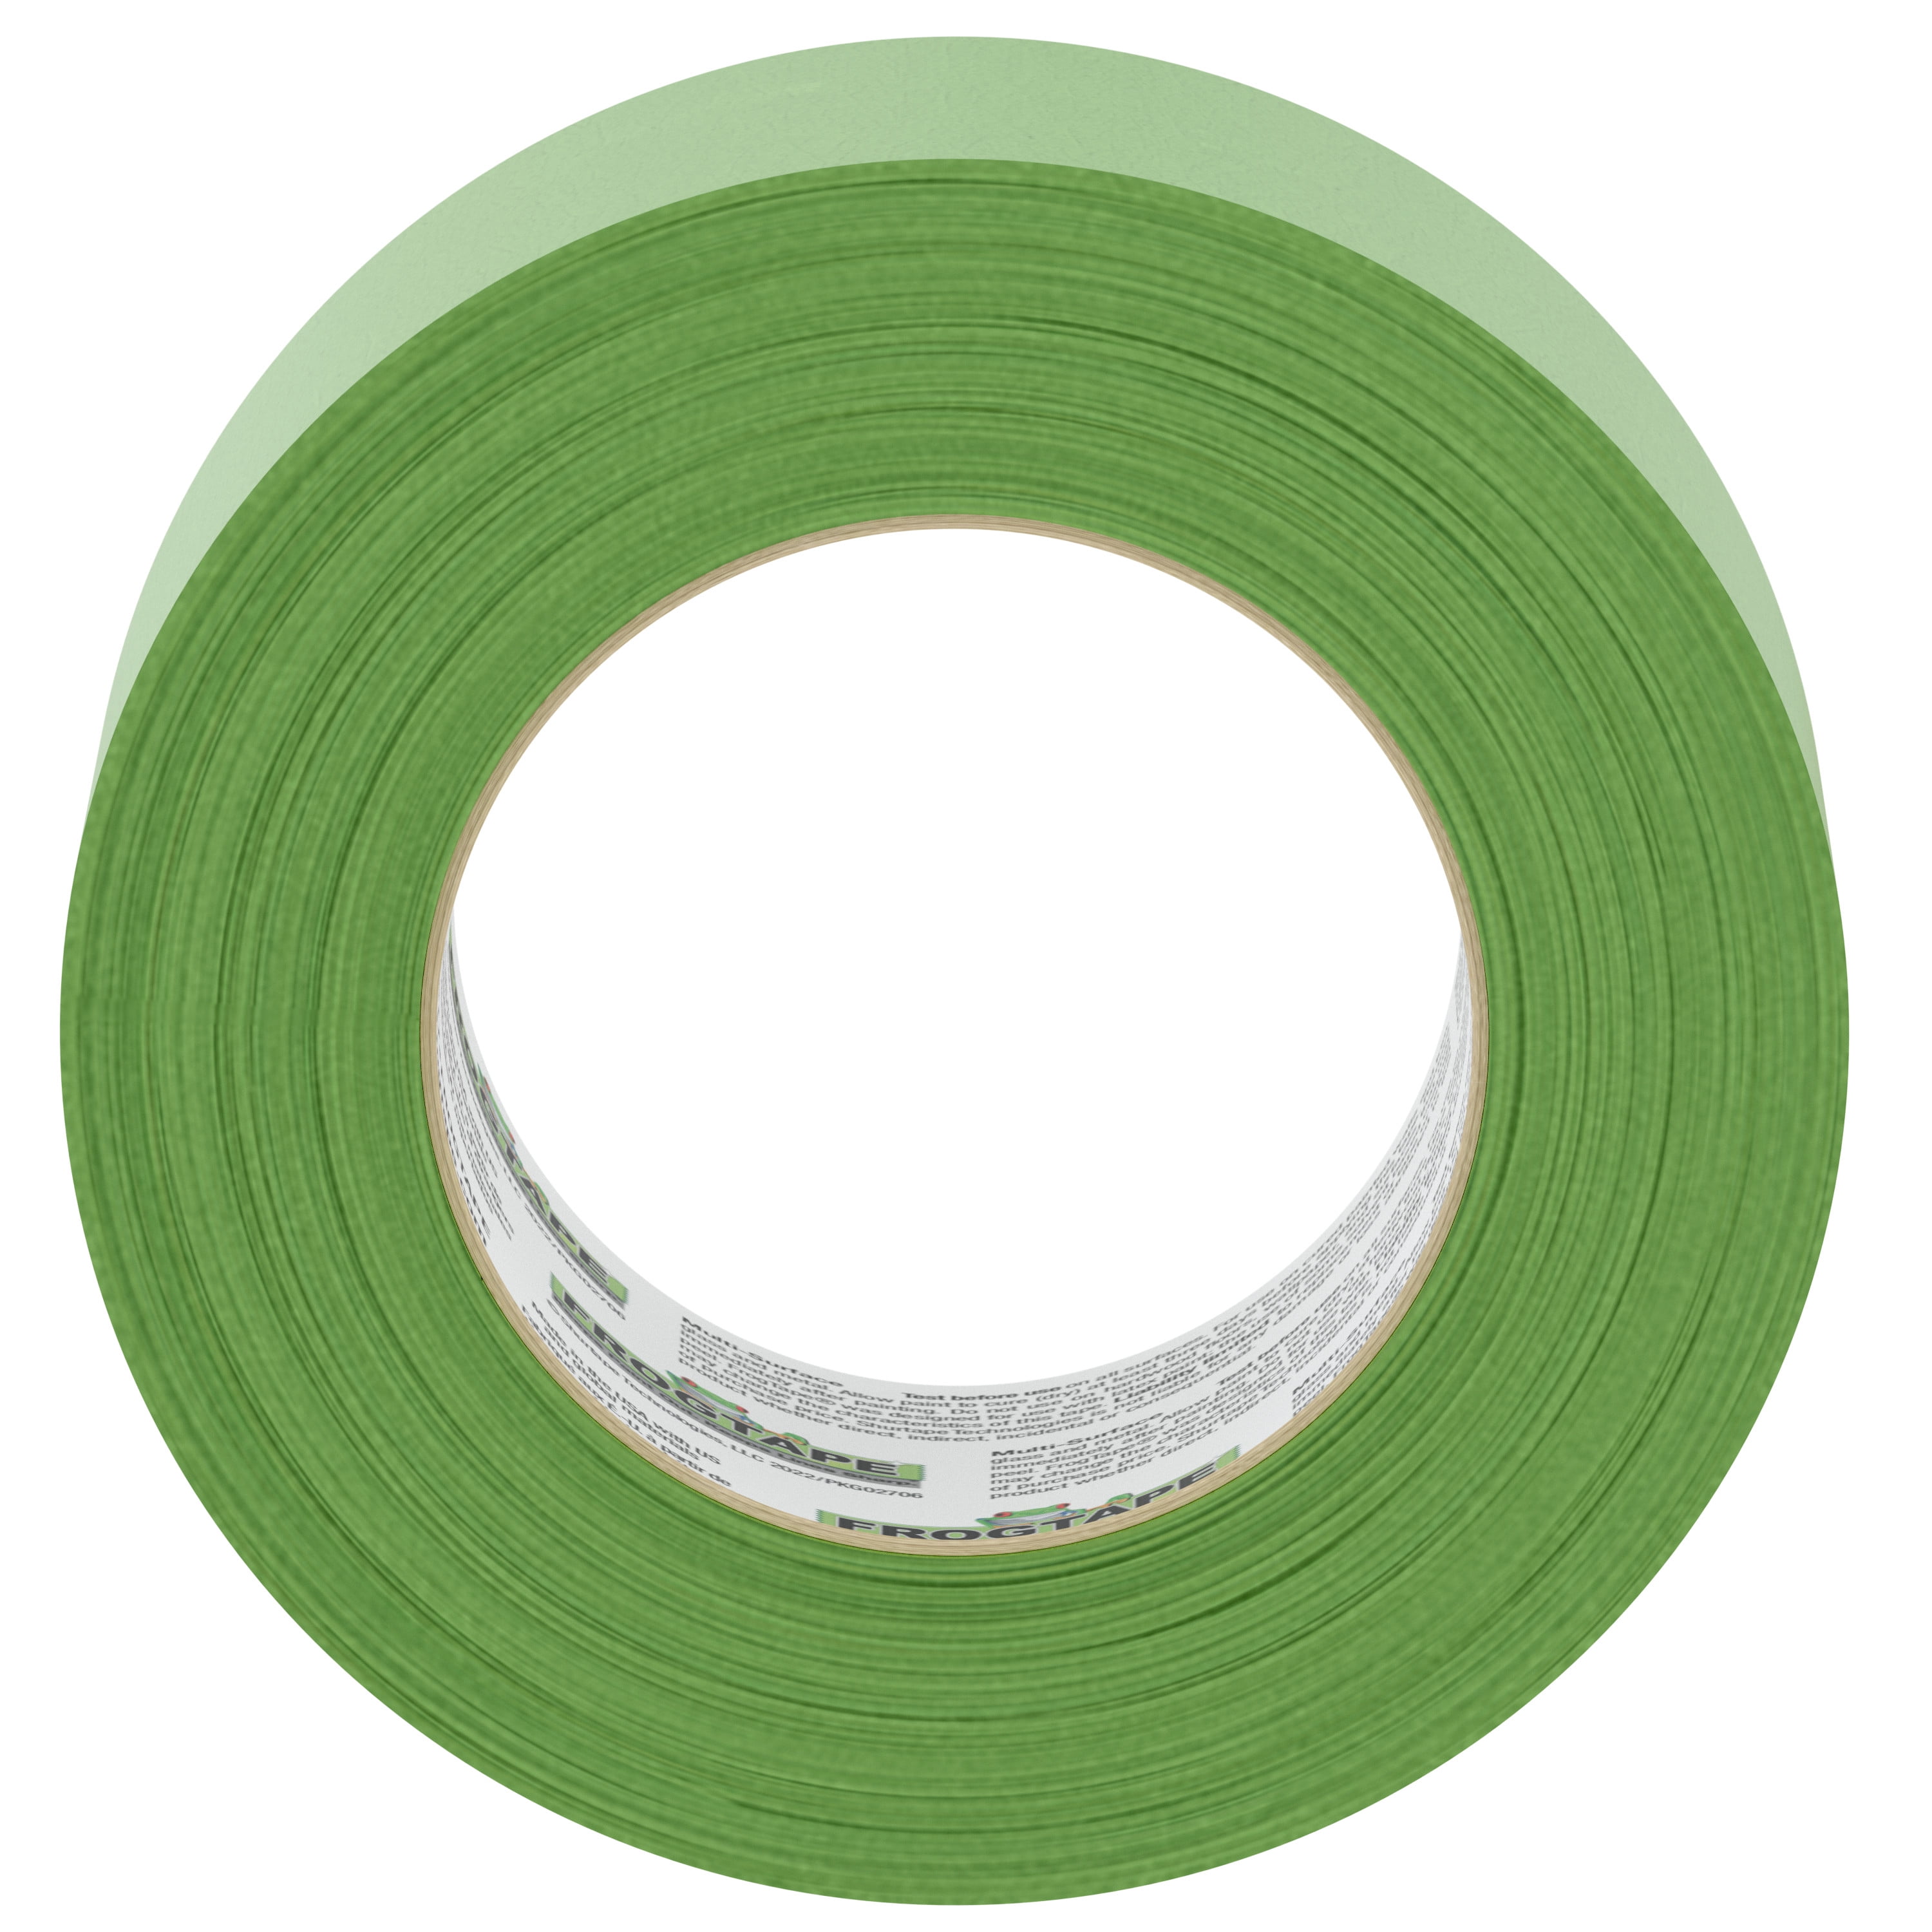 2-PK PAINTER'S MATE Multi-Surface Painter's Tape Green 1.88 IN x 60 YD –  PayWut